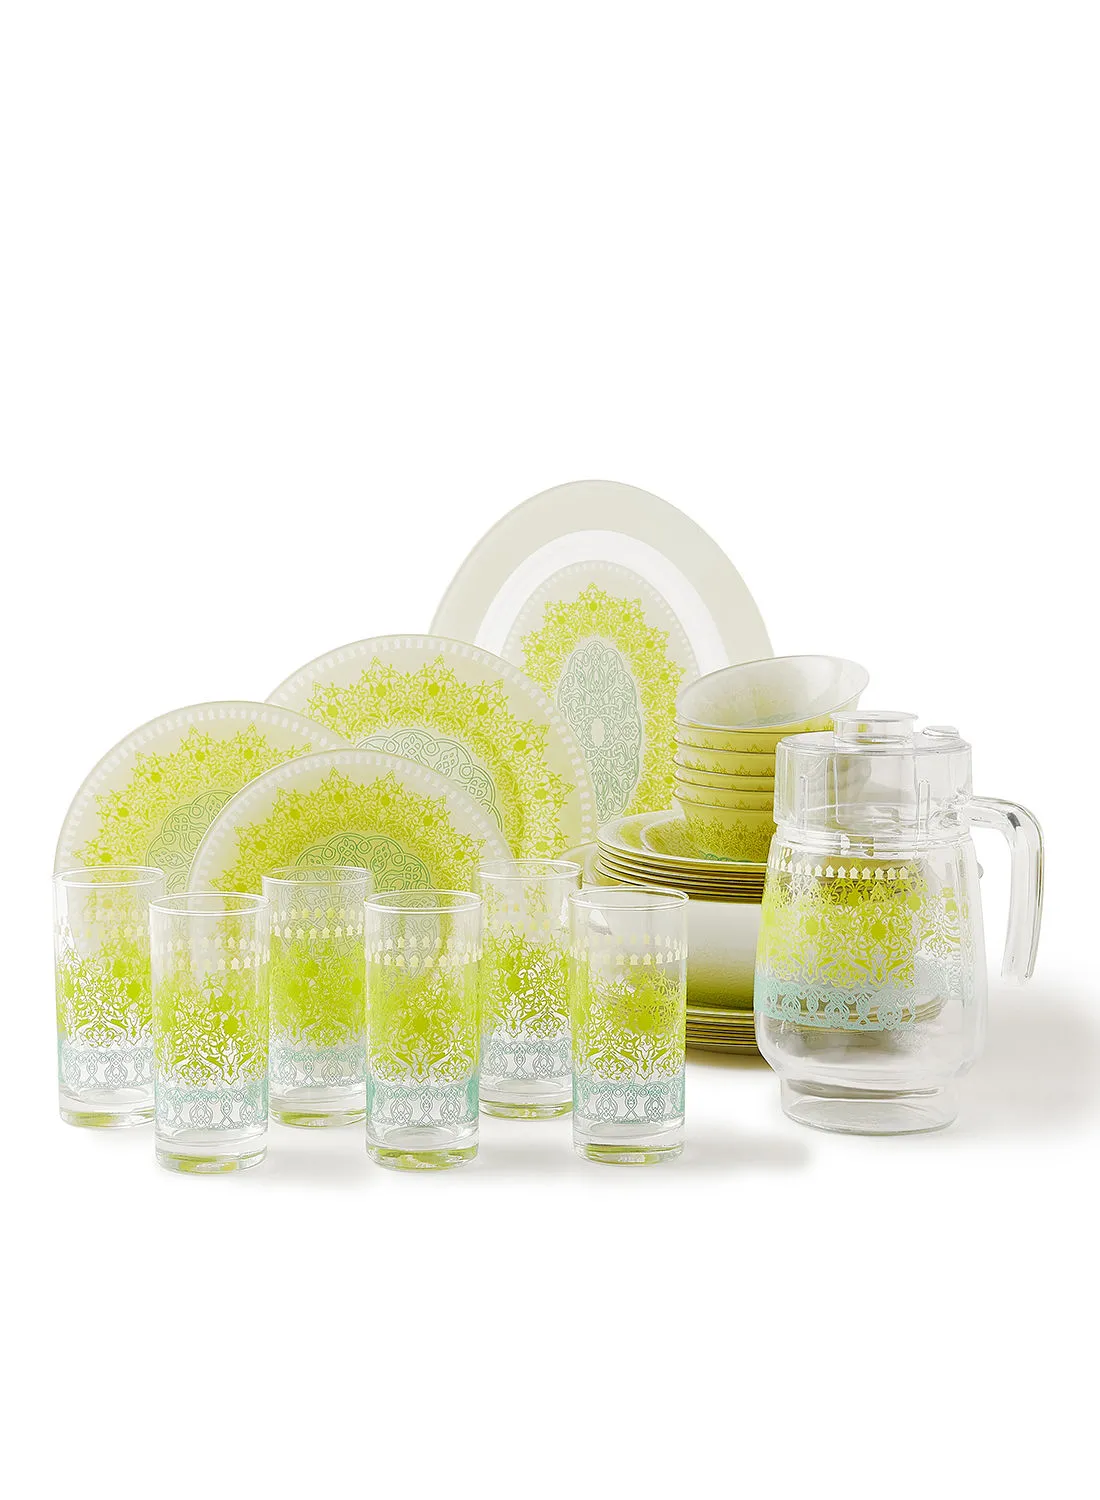 noon east 34 Piece Glass Dinner Set For Everyday Use - Light Weight Dishes, Plates - Dinner Plate, Side Plate, Bowl - Serves 6 - Printed Design Ziko